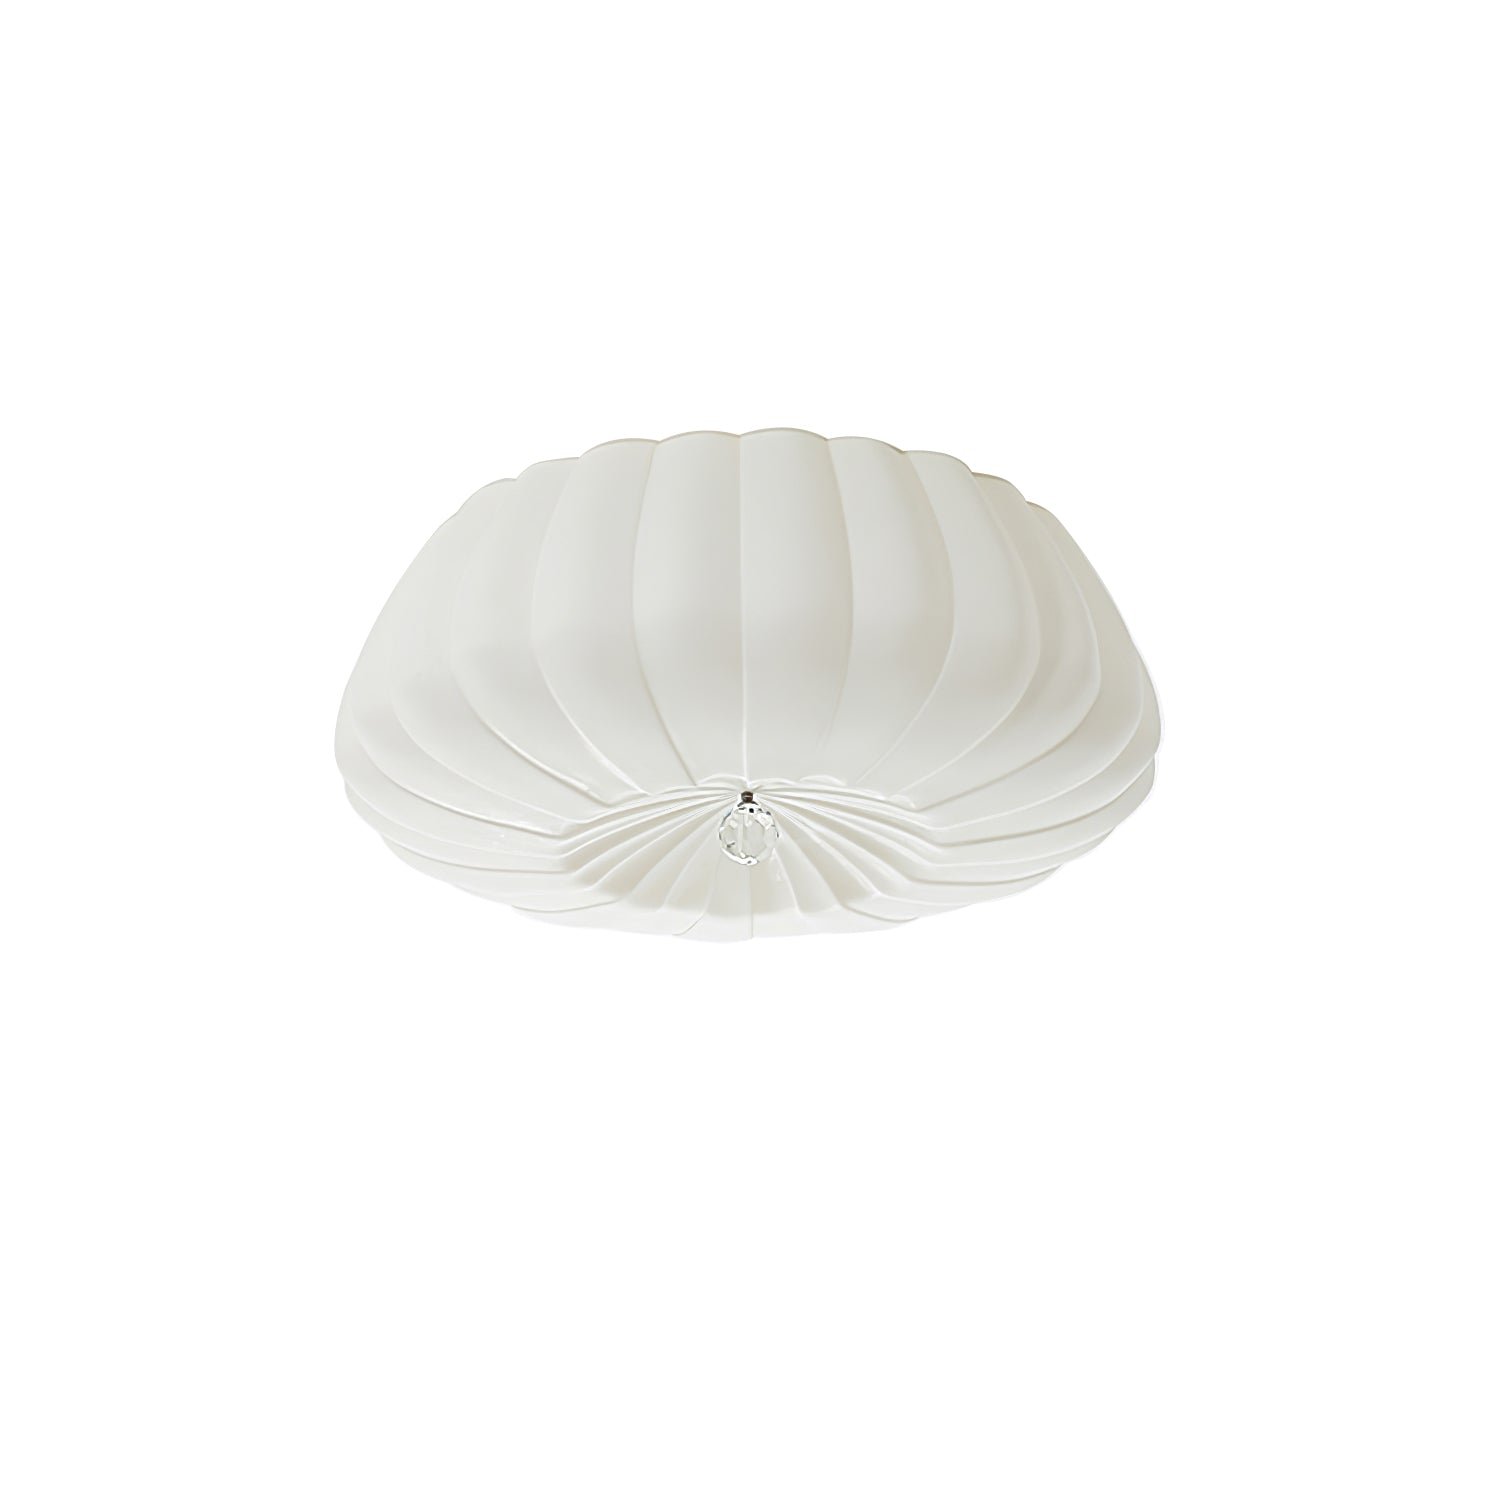 White Three-Color Changing LED Ceiling Lamp in Pumpkin Design, Dimensions: Diameter 40cm x Height 11cm (Ø 15.7″ x L 4.3″)